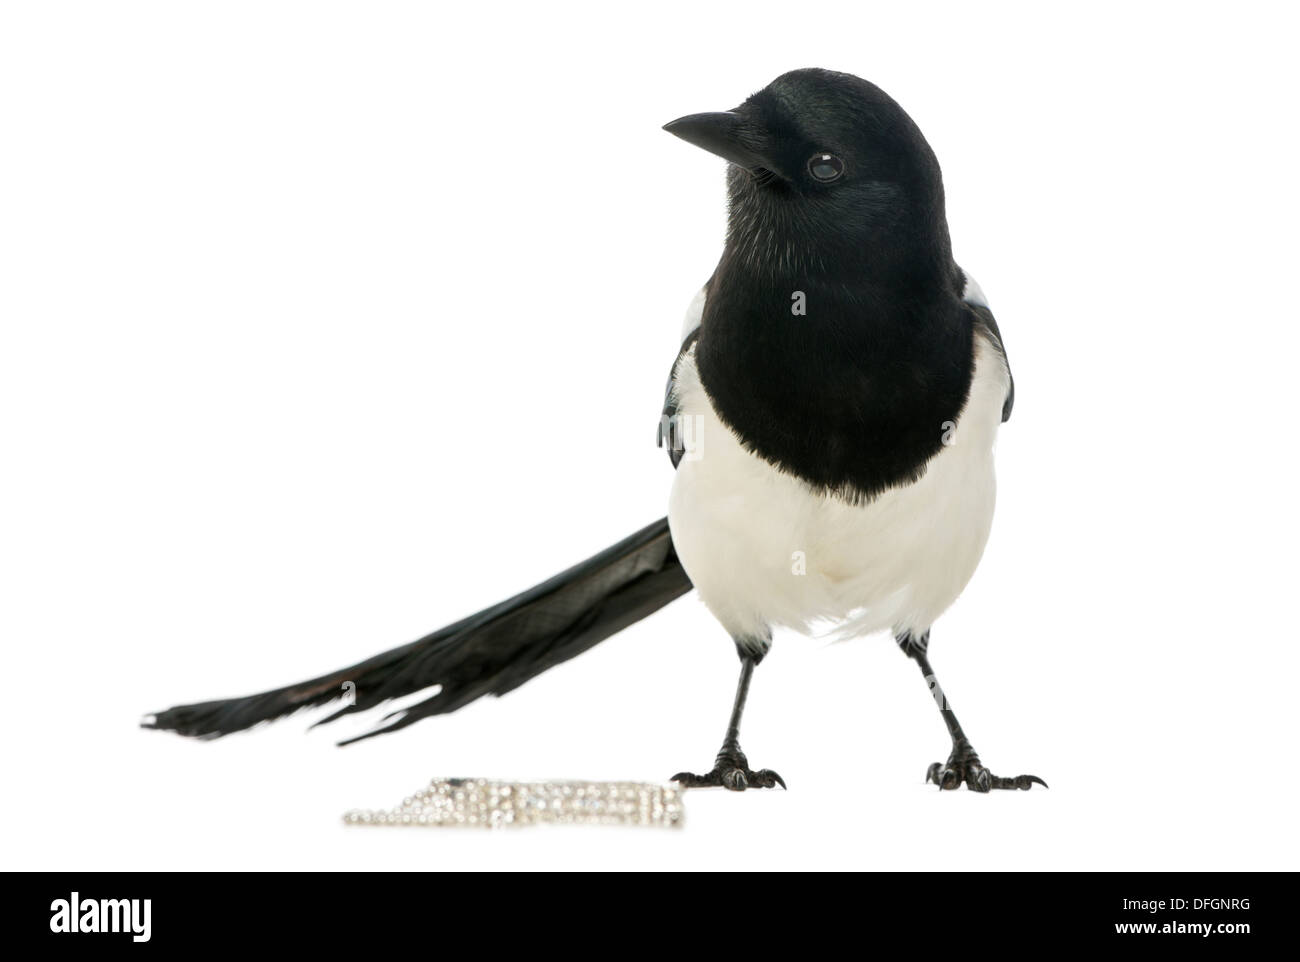 Common Magpie with jewelery, Pica pica, against white background Stock Photo